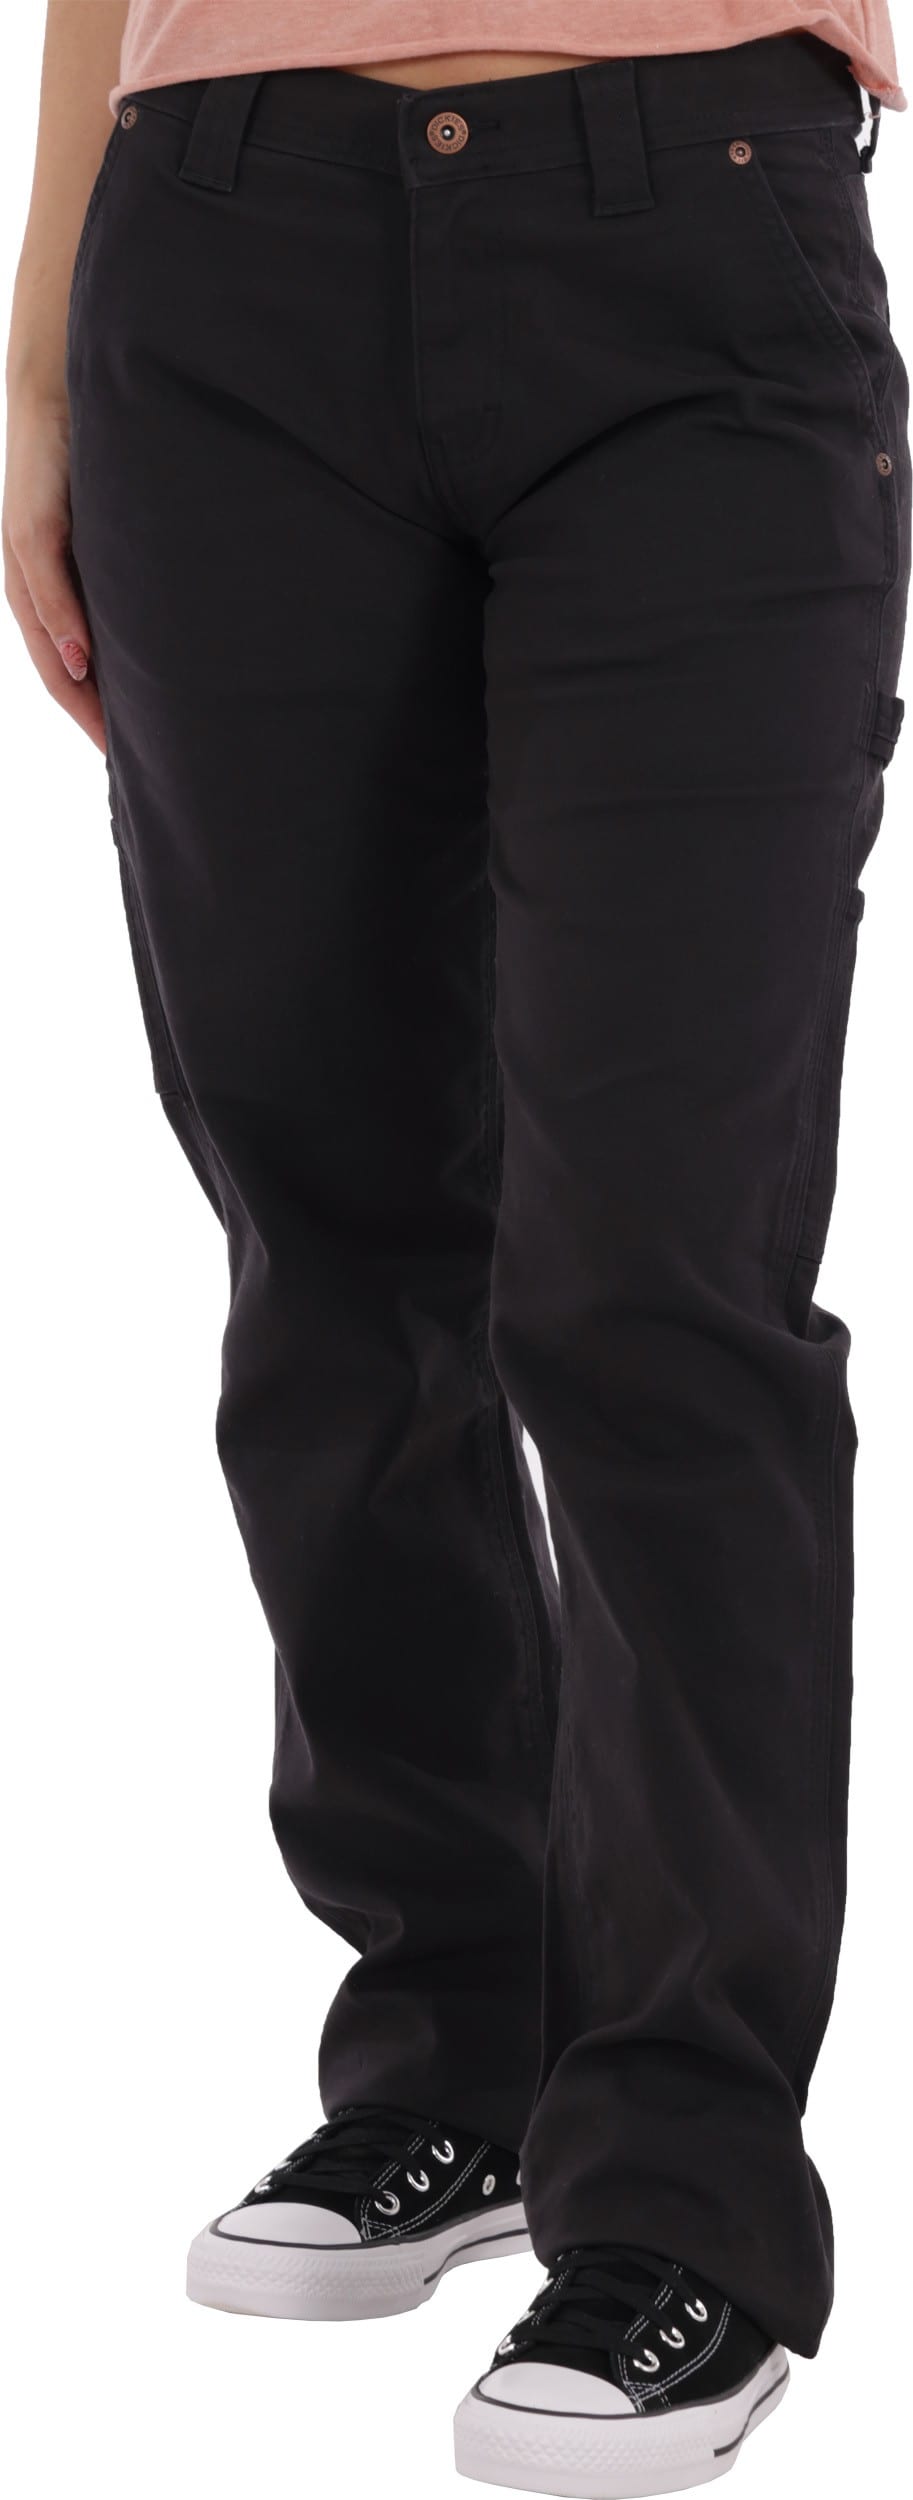 Dickies Women's Relaxed Straight Carpenter Duck Pants - rinsed black ...